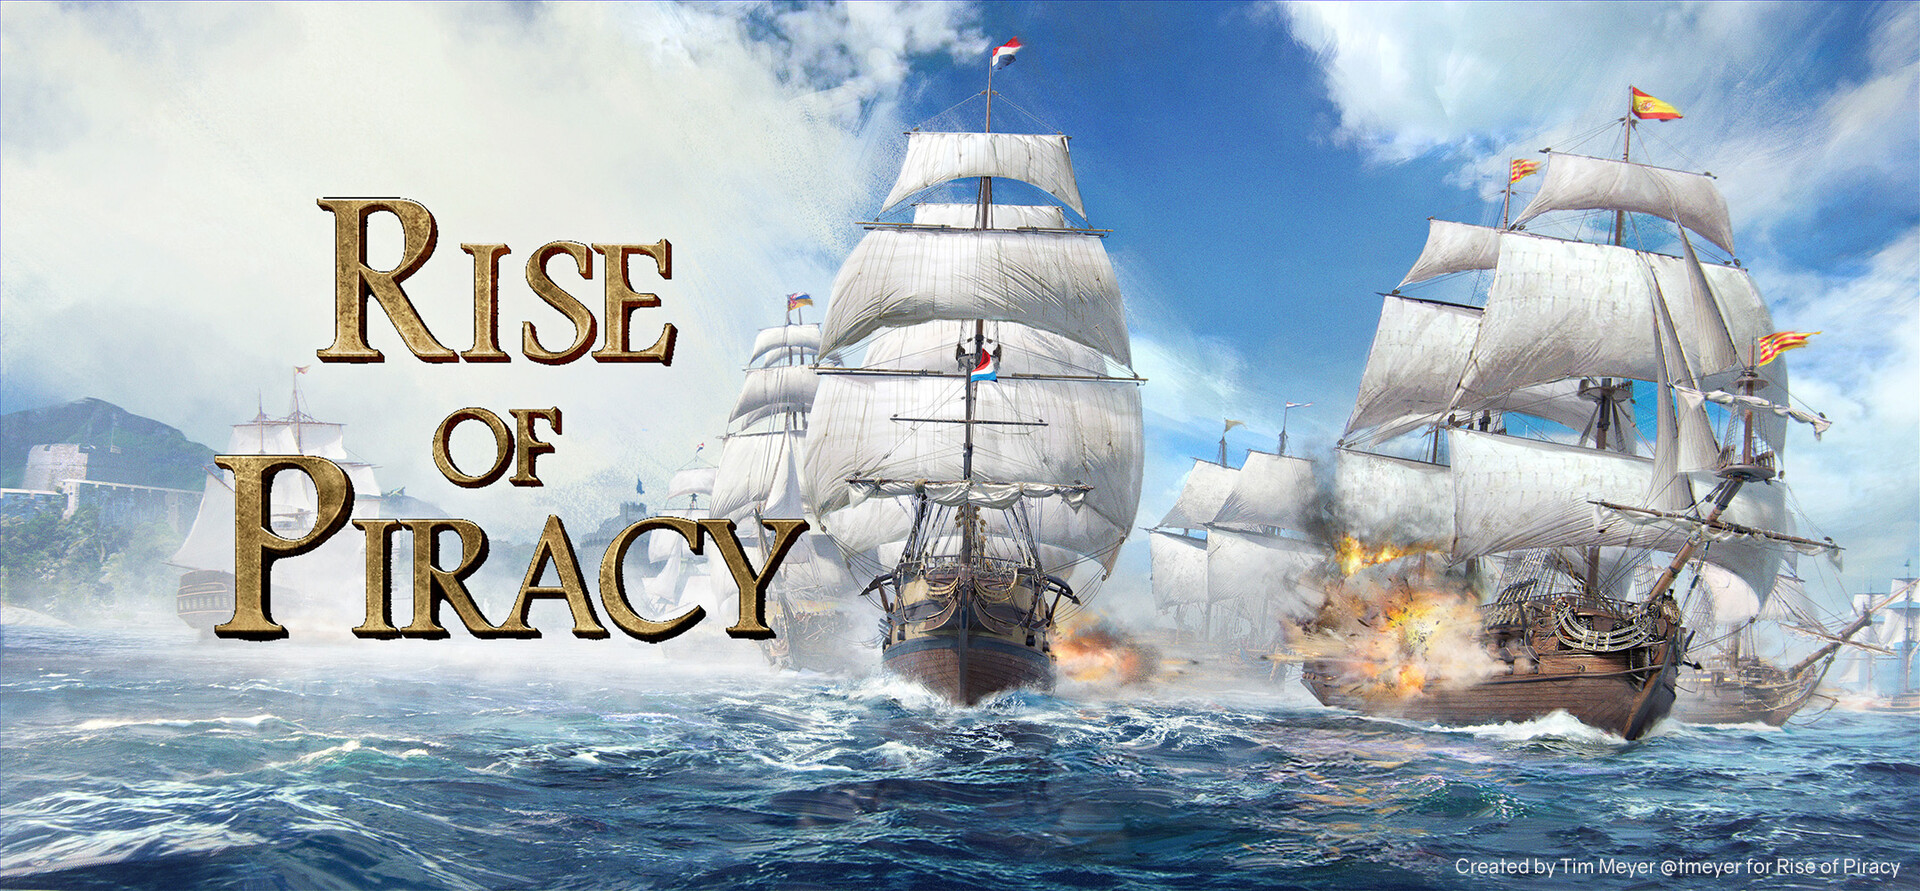 Fora rise. Rise of piracy. Rise of the Pirates. Devil Vessel Rise of Pirates. Indian Ocean piracy.